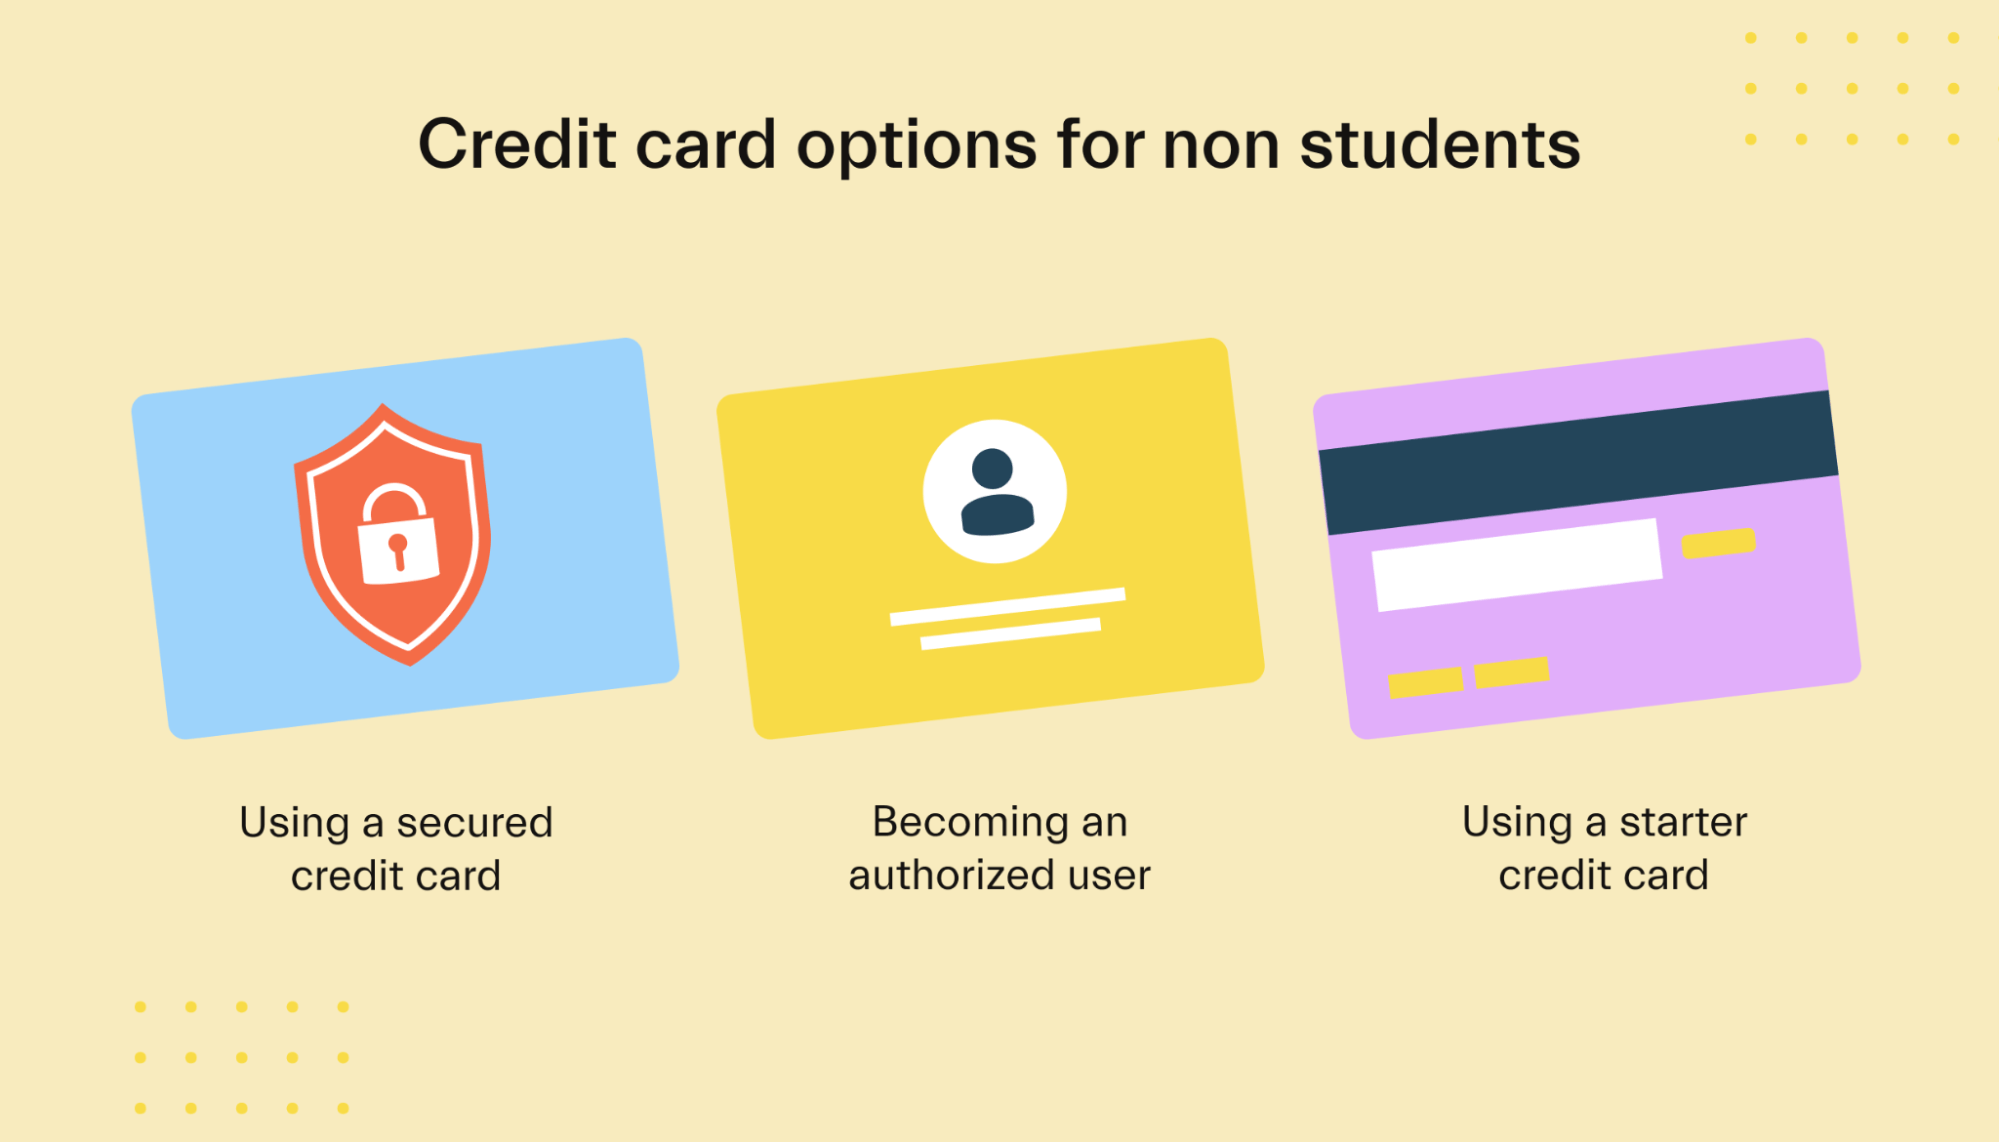 Credit card options for non students